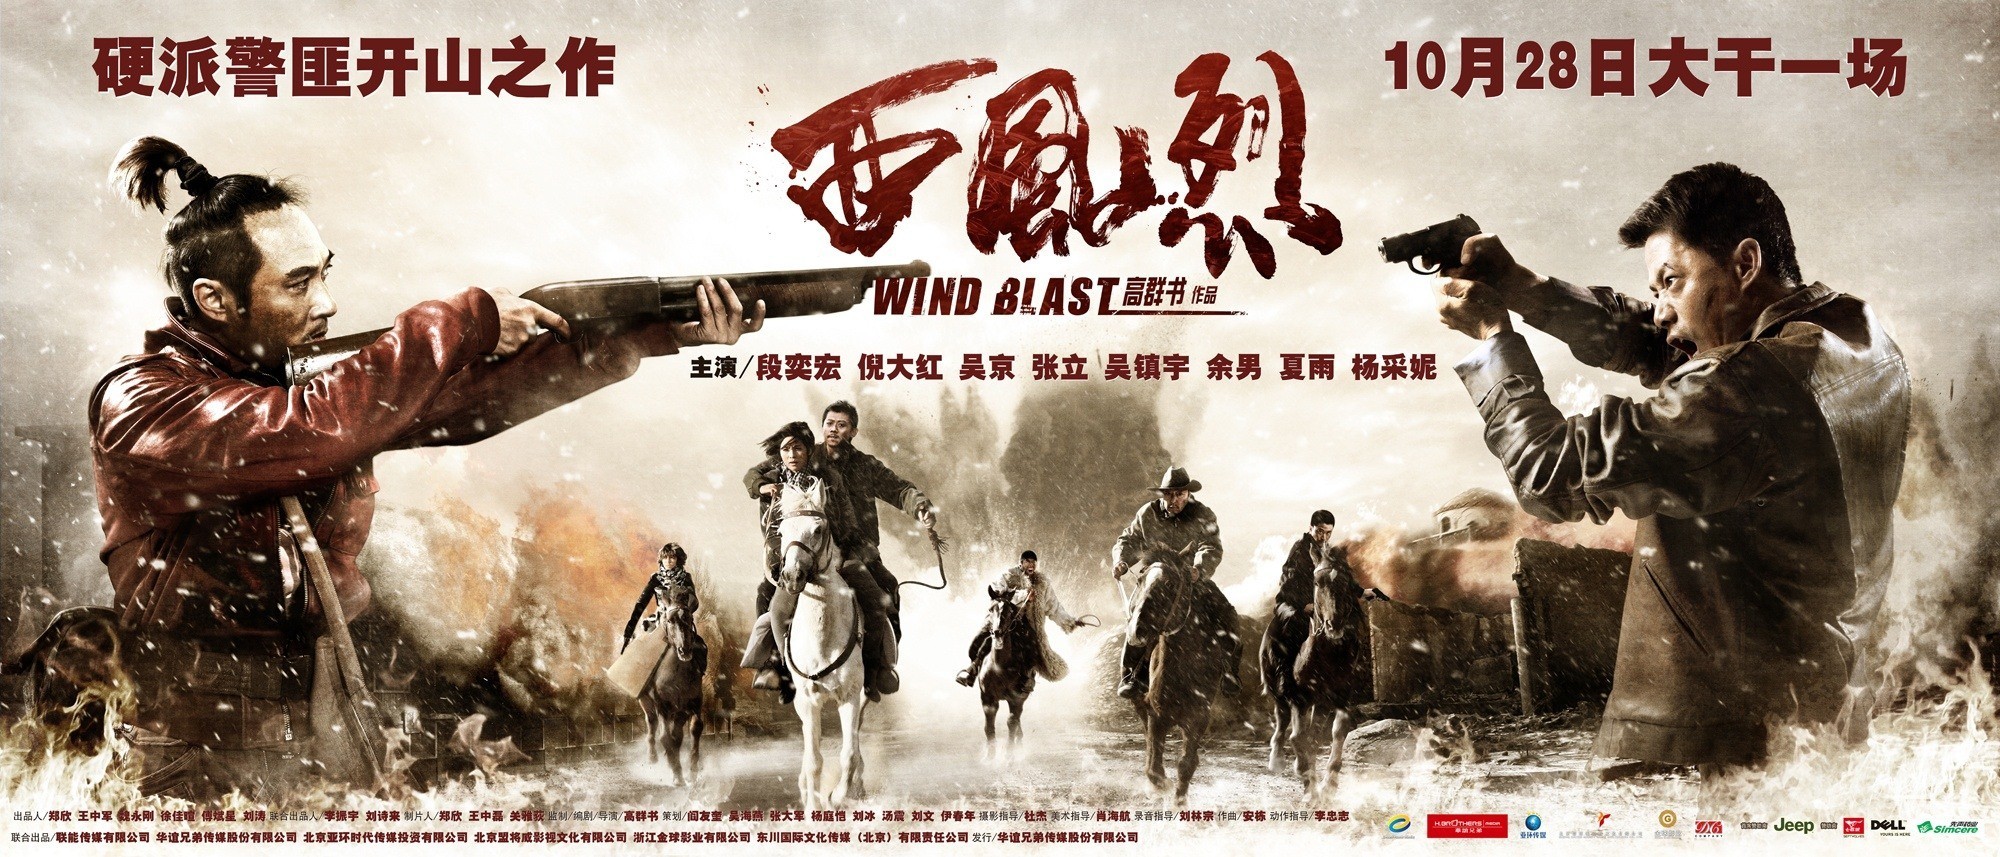 Mega Sized Movie Poster Image for Xi Feng Lie (#5 of 6)